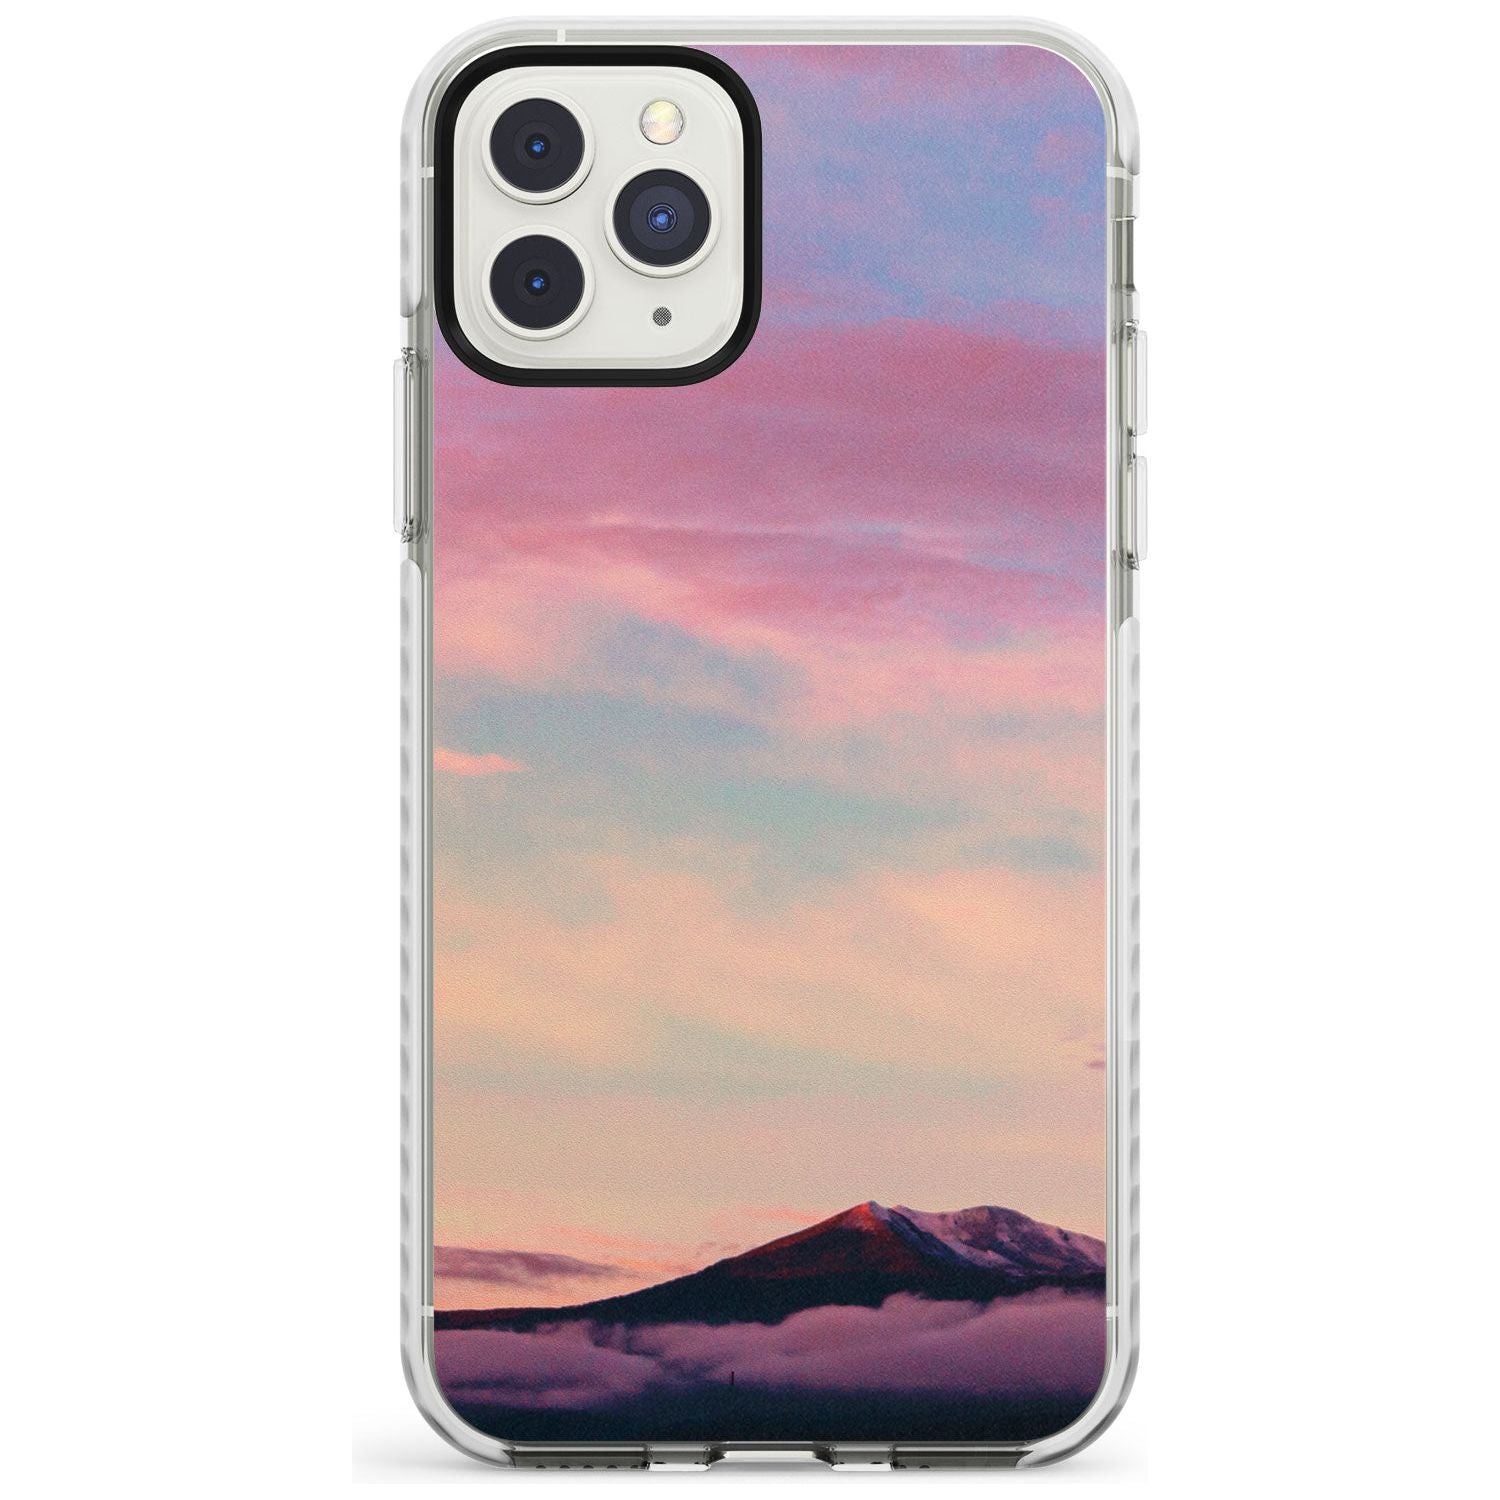 Cloudy Sunset Photograph Impact Phone Case for iPhone 11 Pro Max